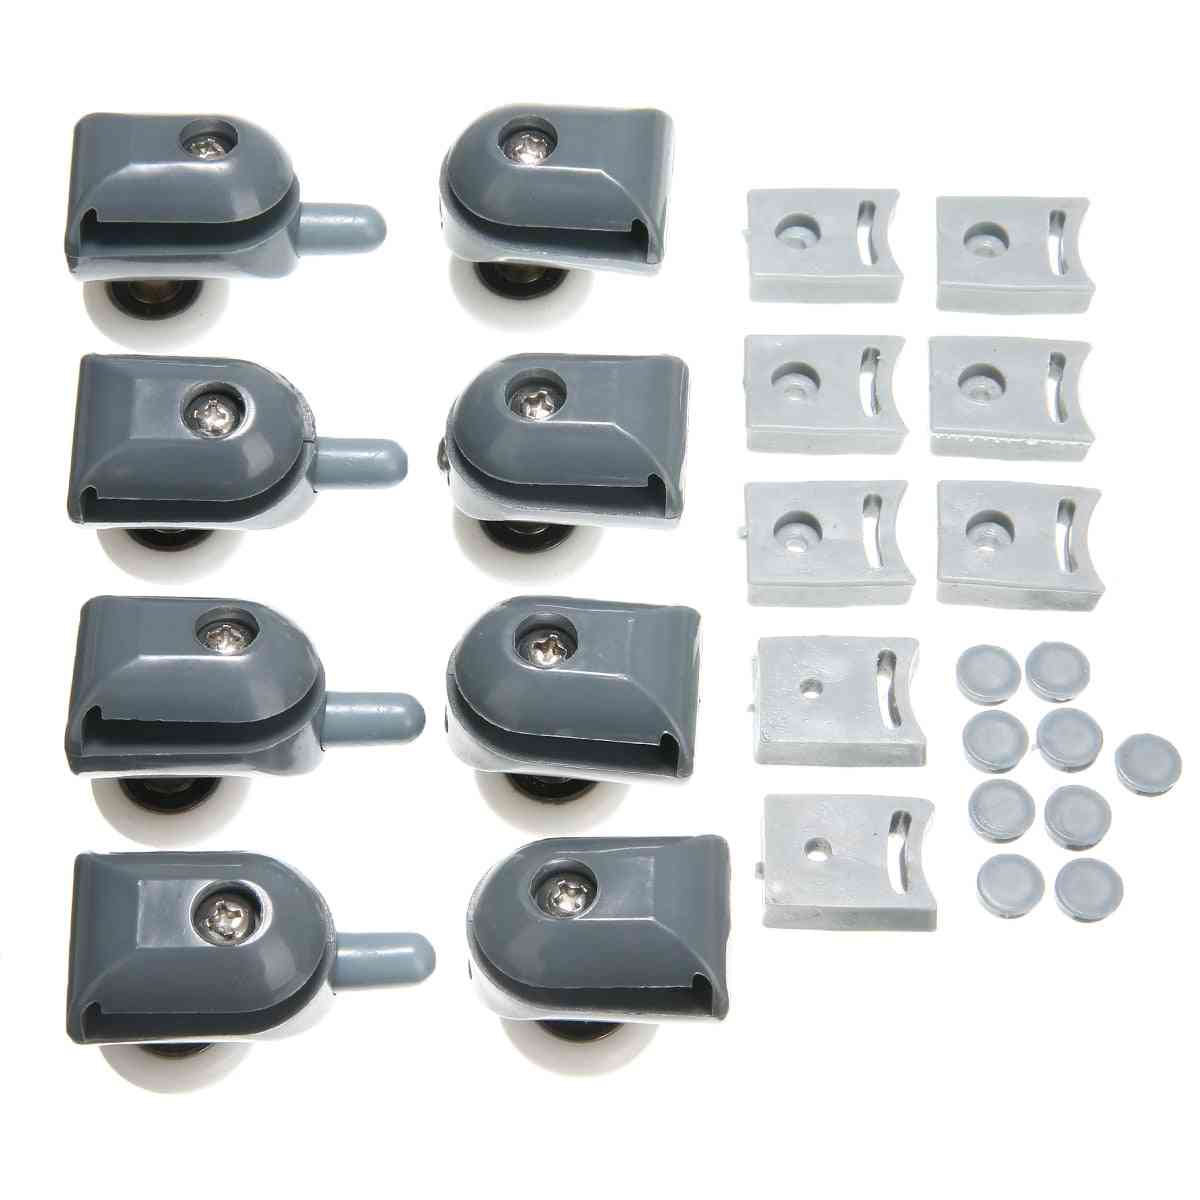 Replacement Wheel With Anti-collision Positioning Block Set